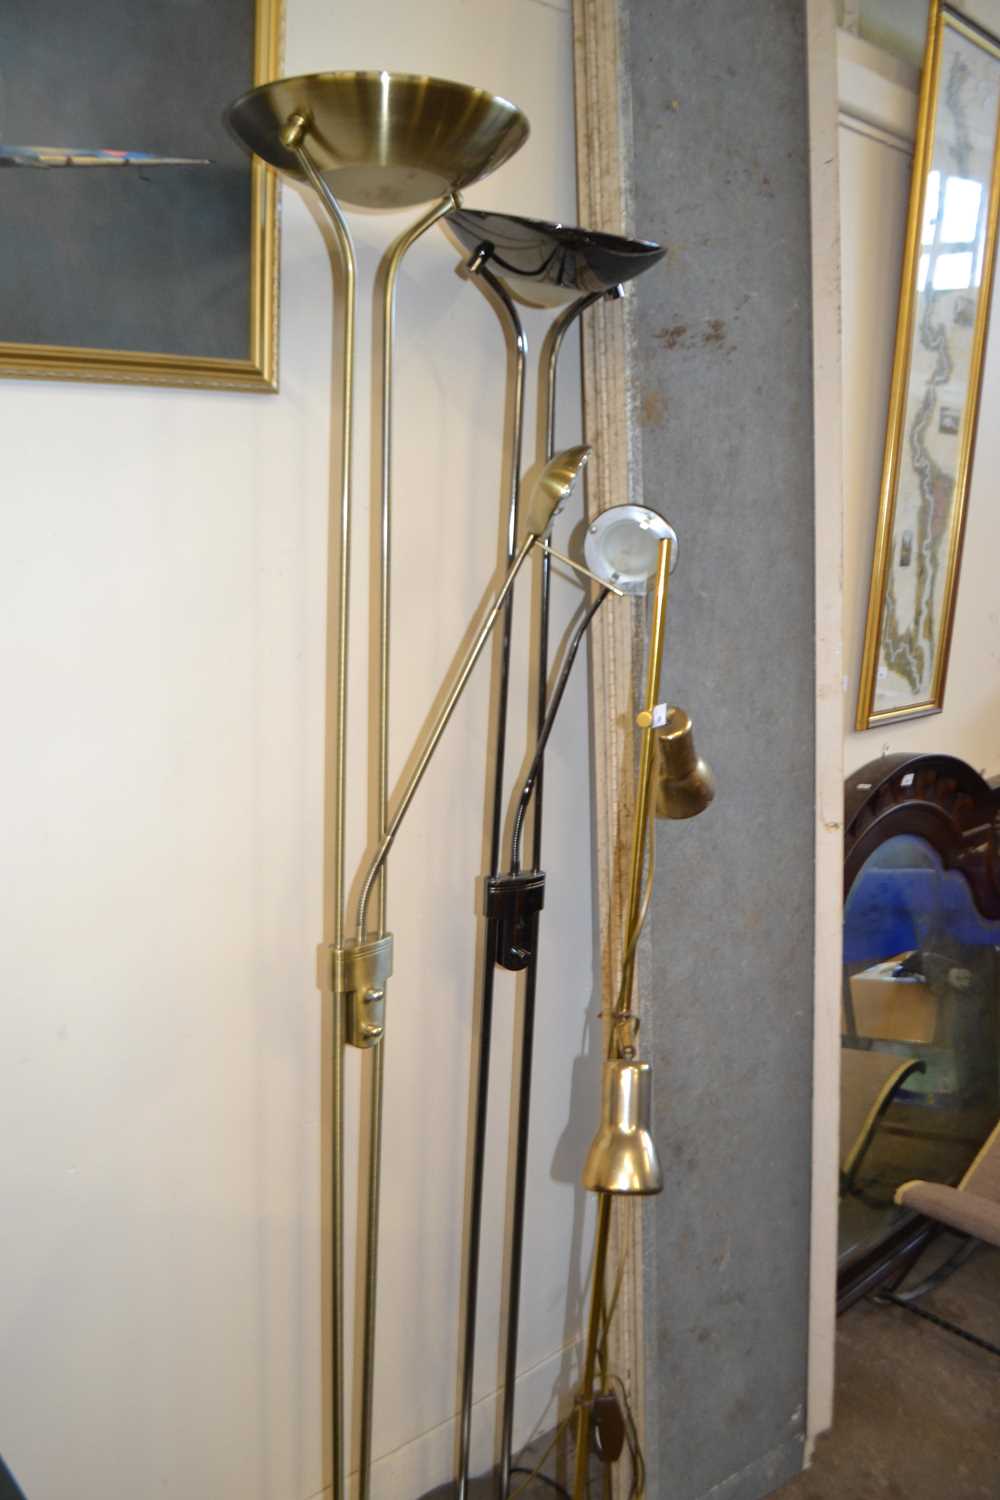 Two uplighters with adjustable lamps and a two light brass effect standard lamp (3)